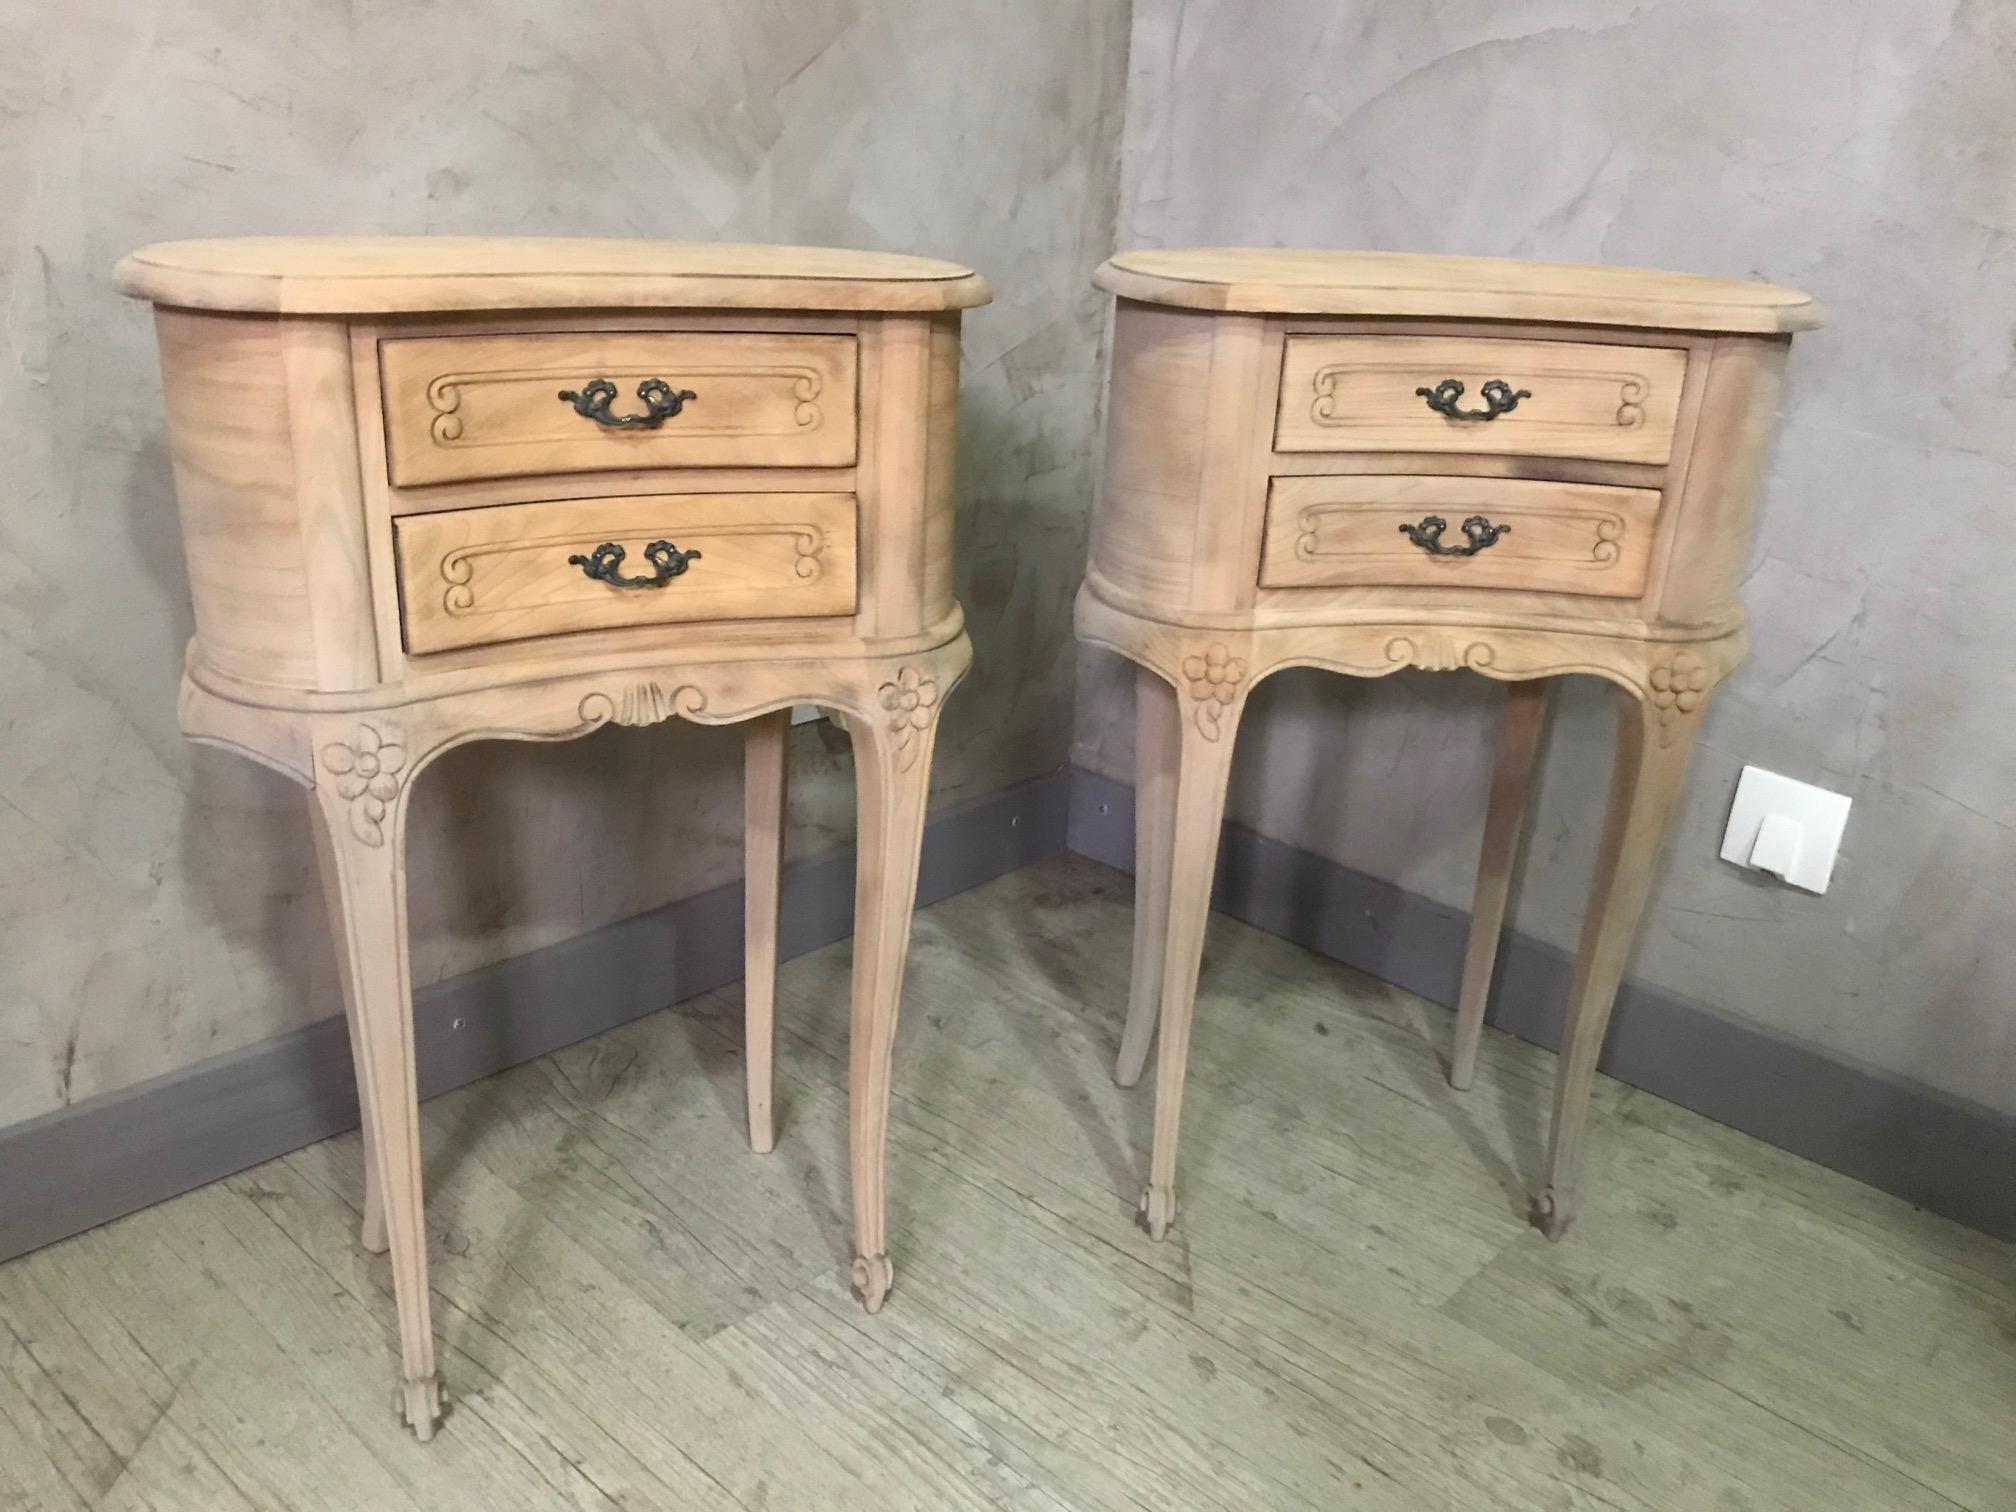 Very nice 20th century pair of pickeled Louis XV style night table.
Has been pickeled so you can choose you own patina. 
Brass handles. 
Good condition.